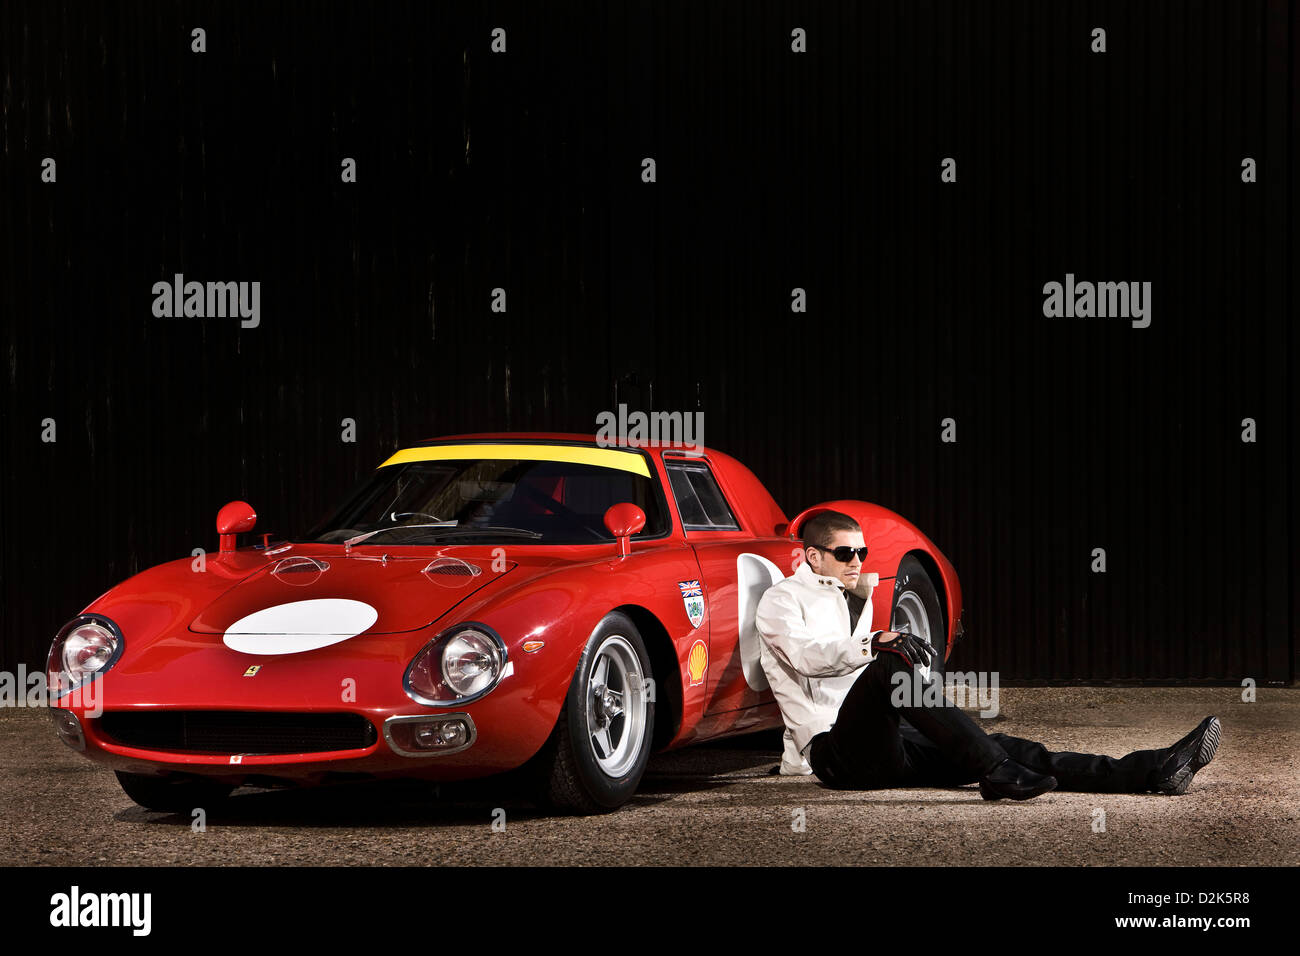 Man sitting by red Ferrari Coupe 250 LM sports car Stock Photo